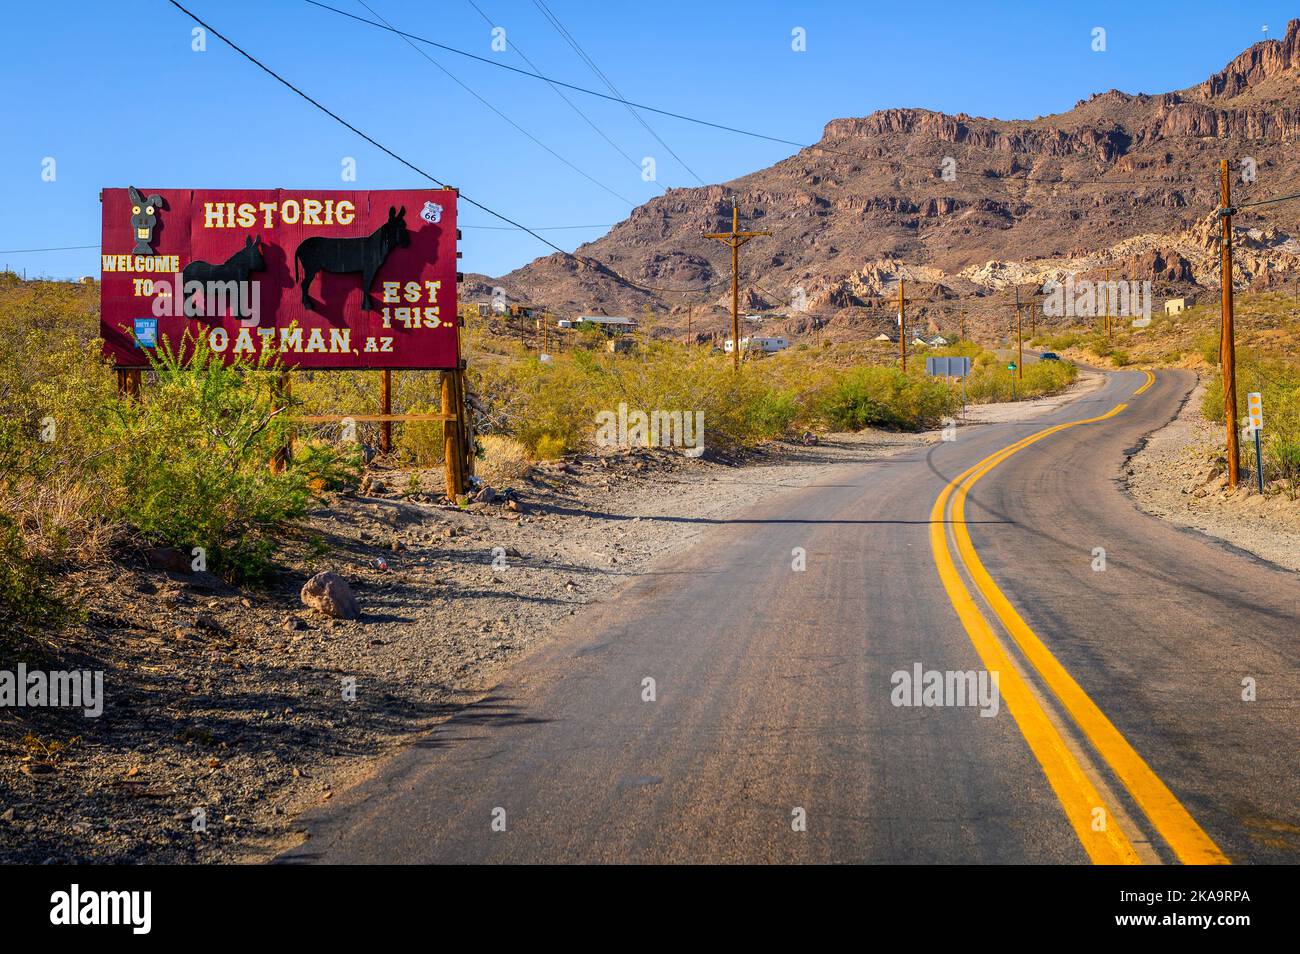 Entry sign at Oatman village on historic Route 66 in Arizona Stock Photo